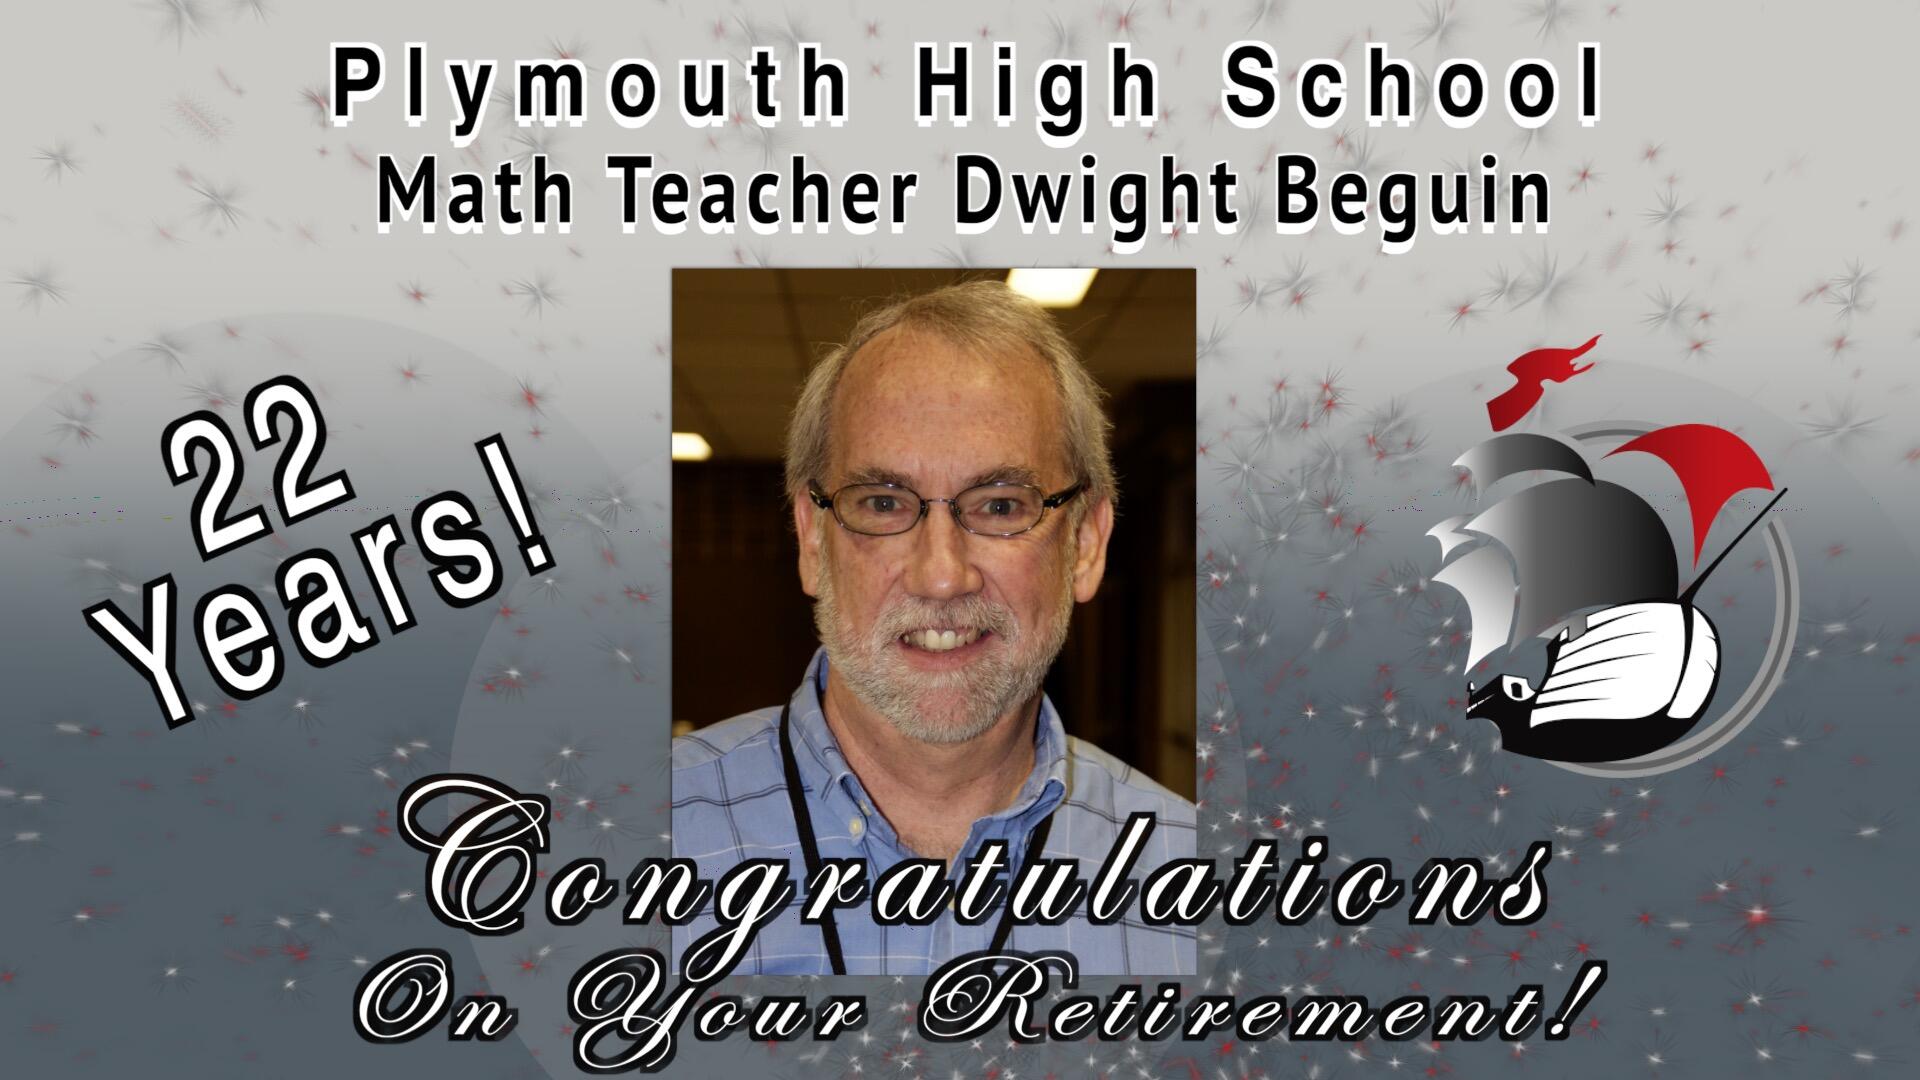 Plymouth High School Math Teacher Dwight Beguin 22 years! Congratulations on your retirement! photo and PHS ship logo